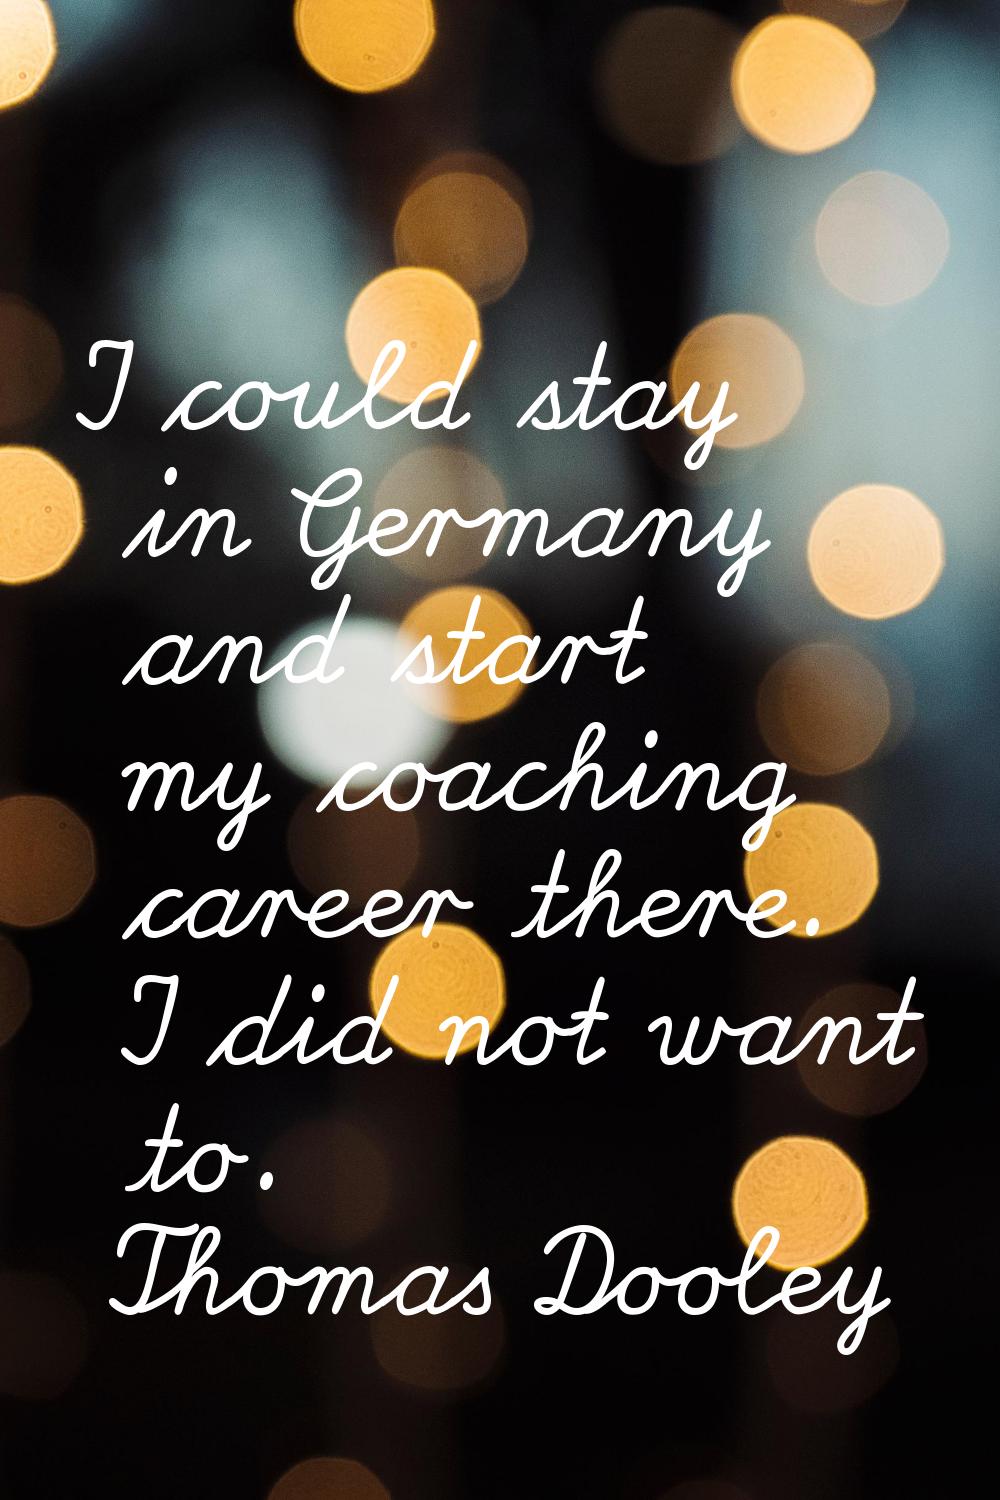 I could stay in Germany and start my coaching career there. I did not want to.